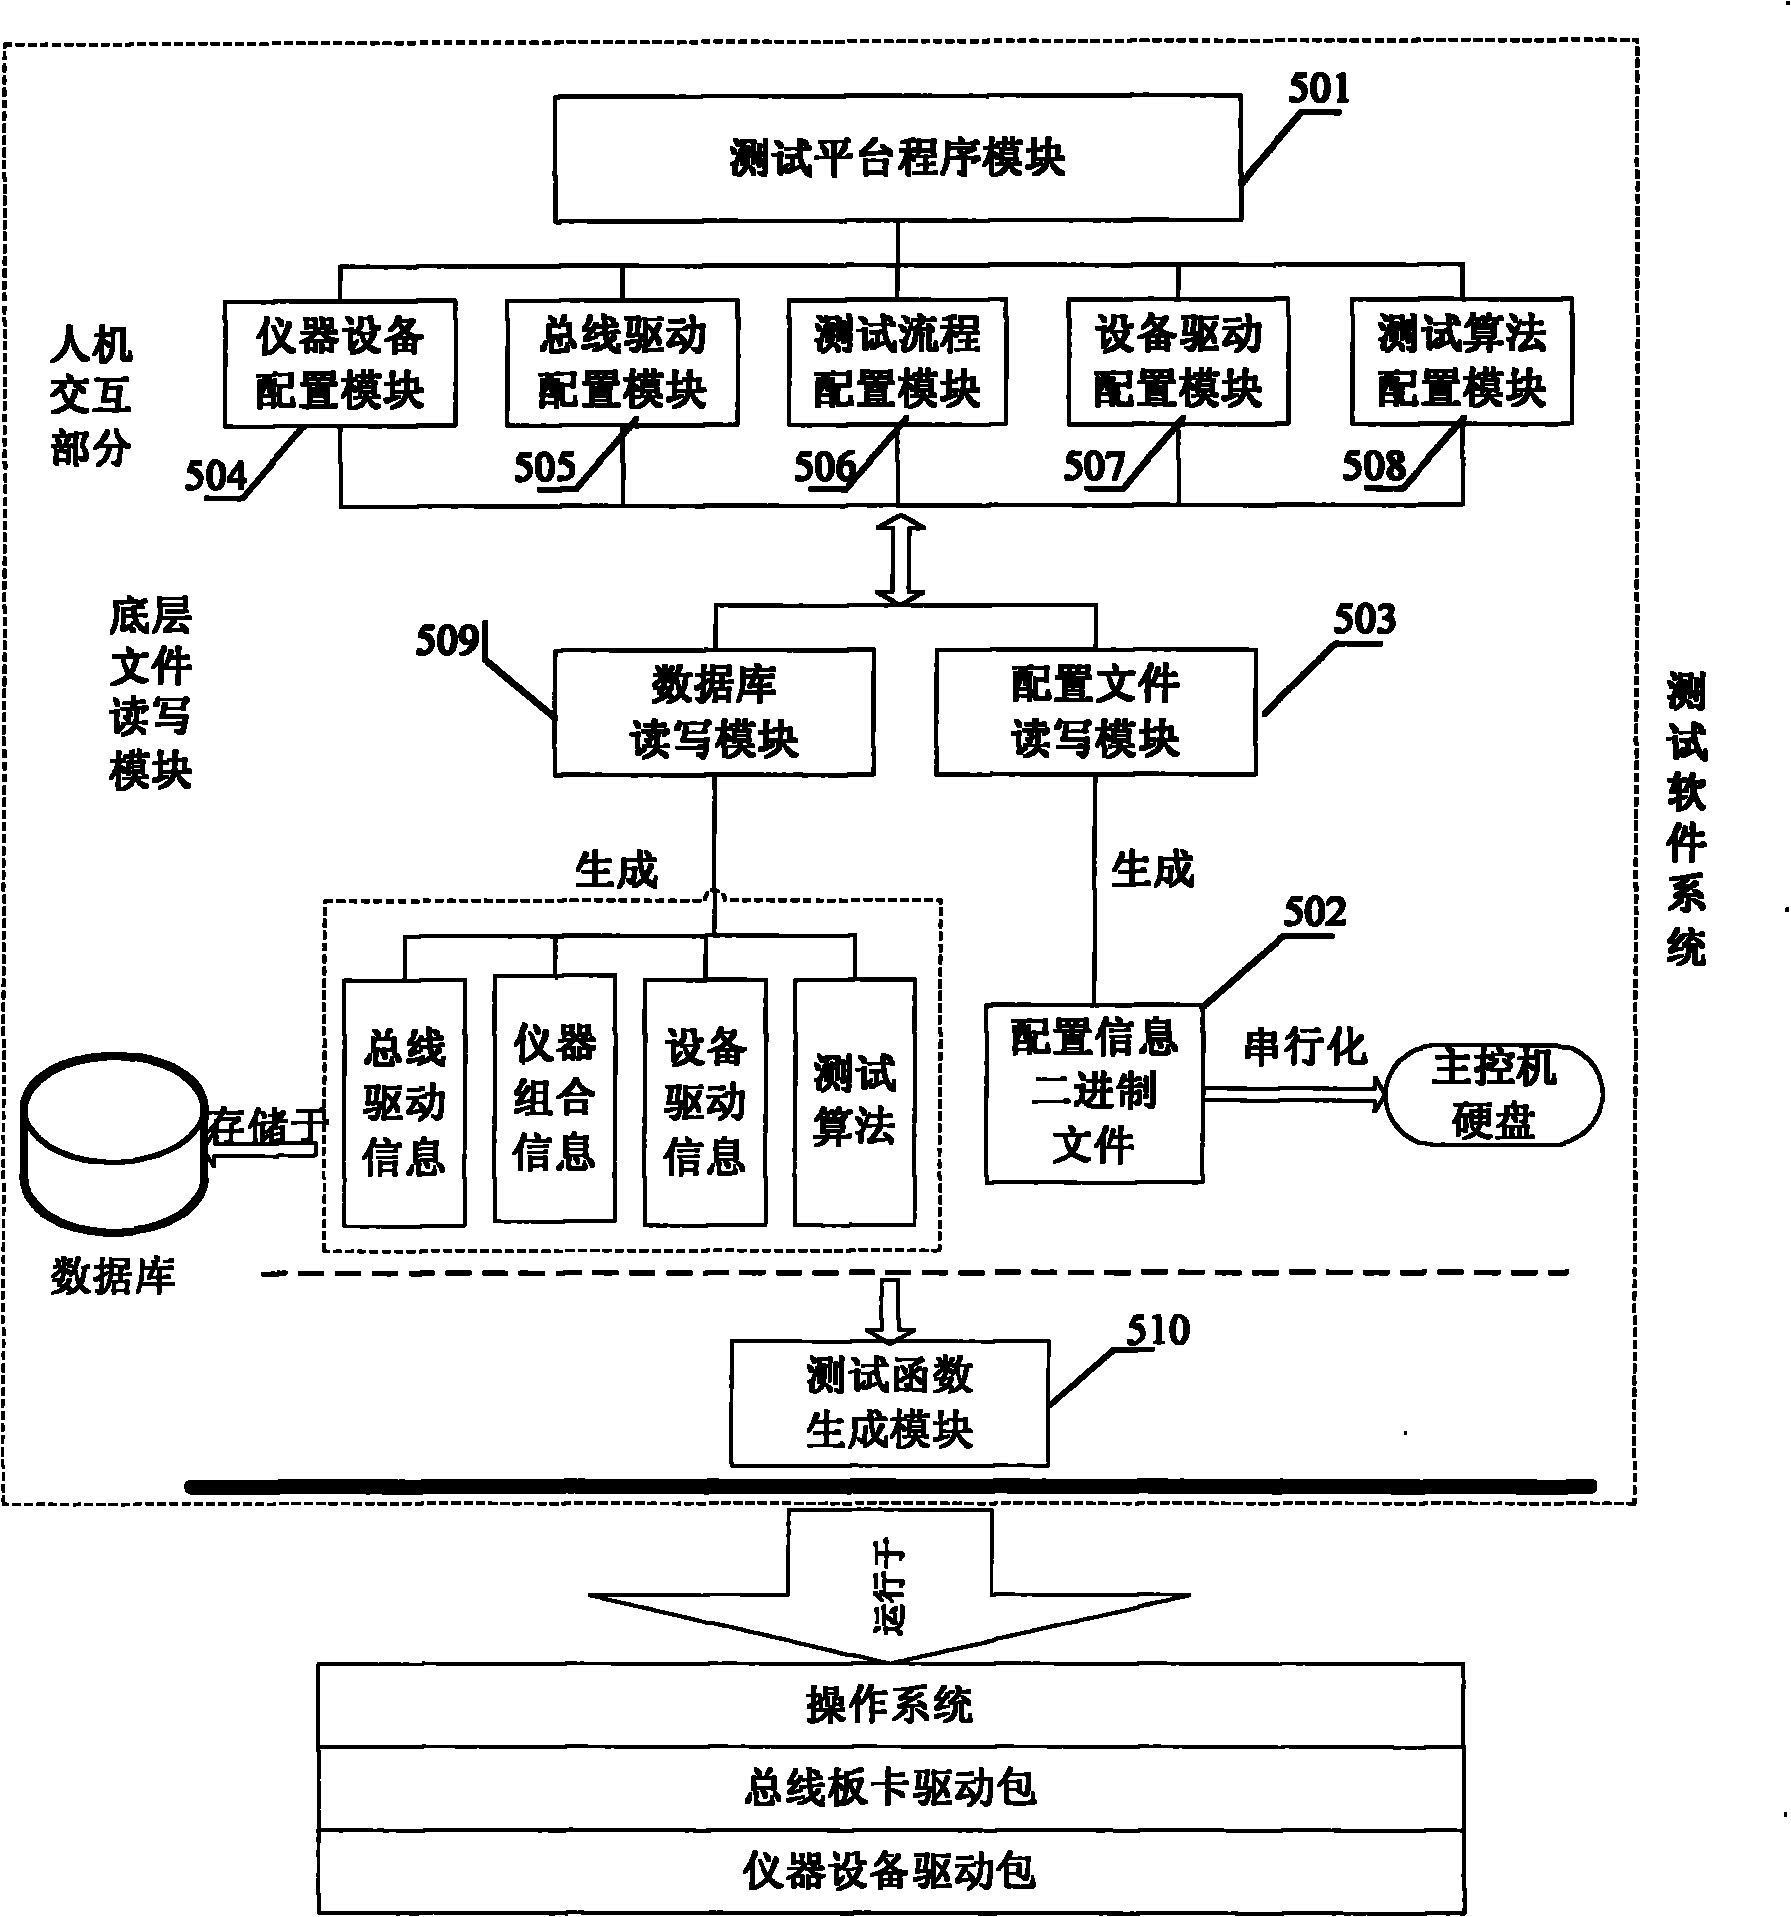 Bus technology-based universal electromagnetic susceptibility testing device and method